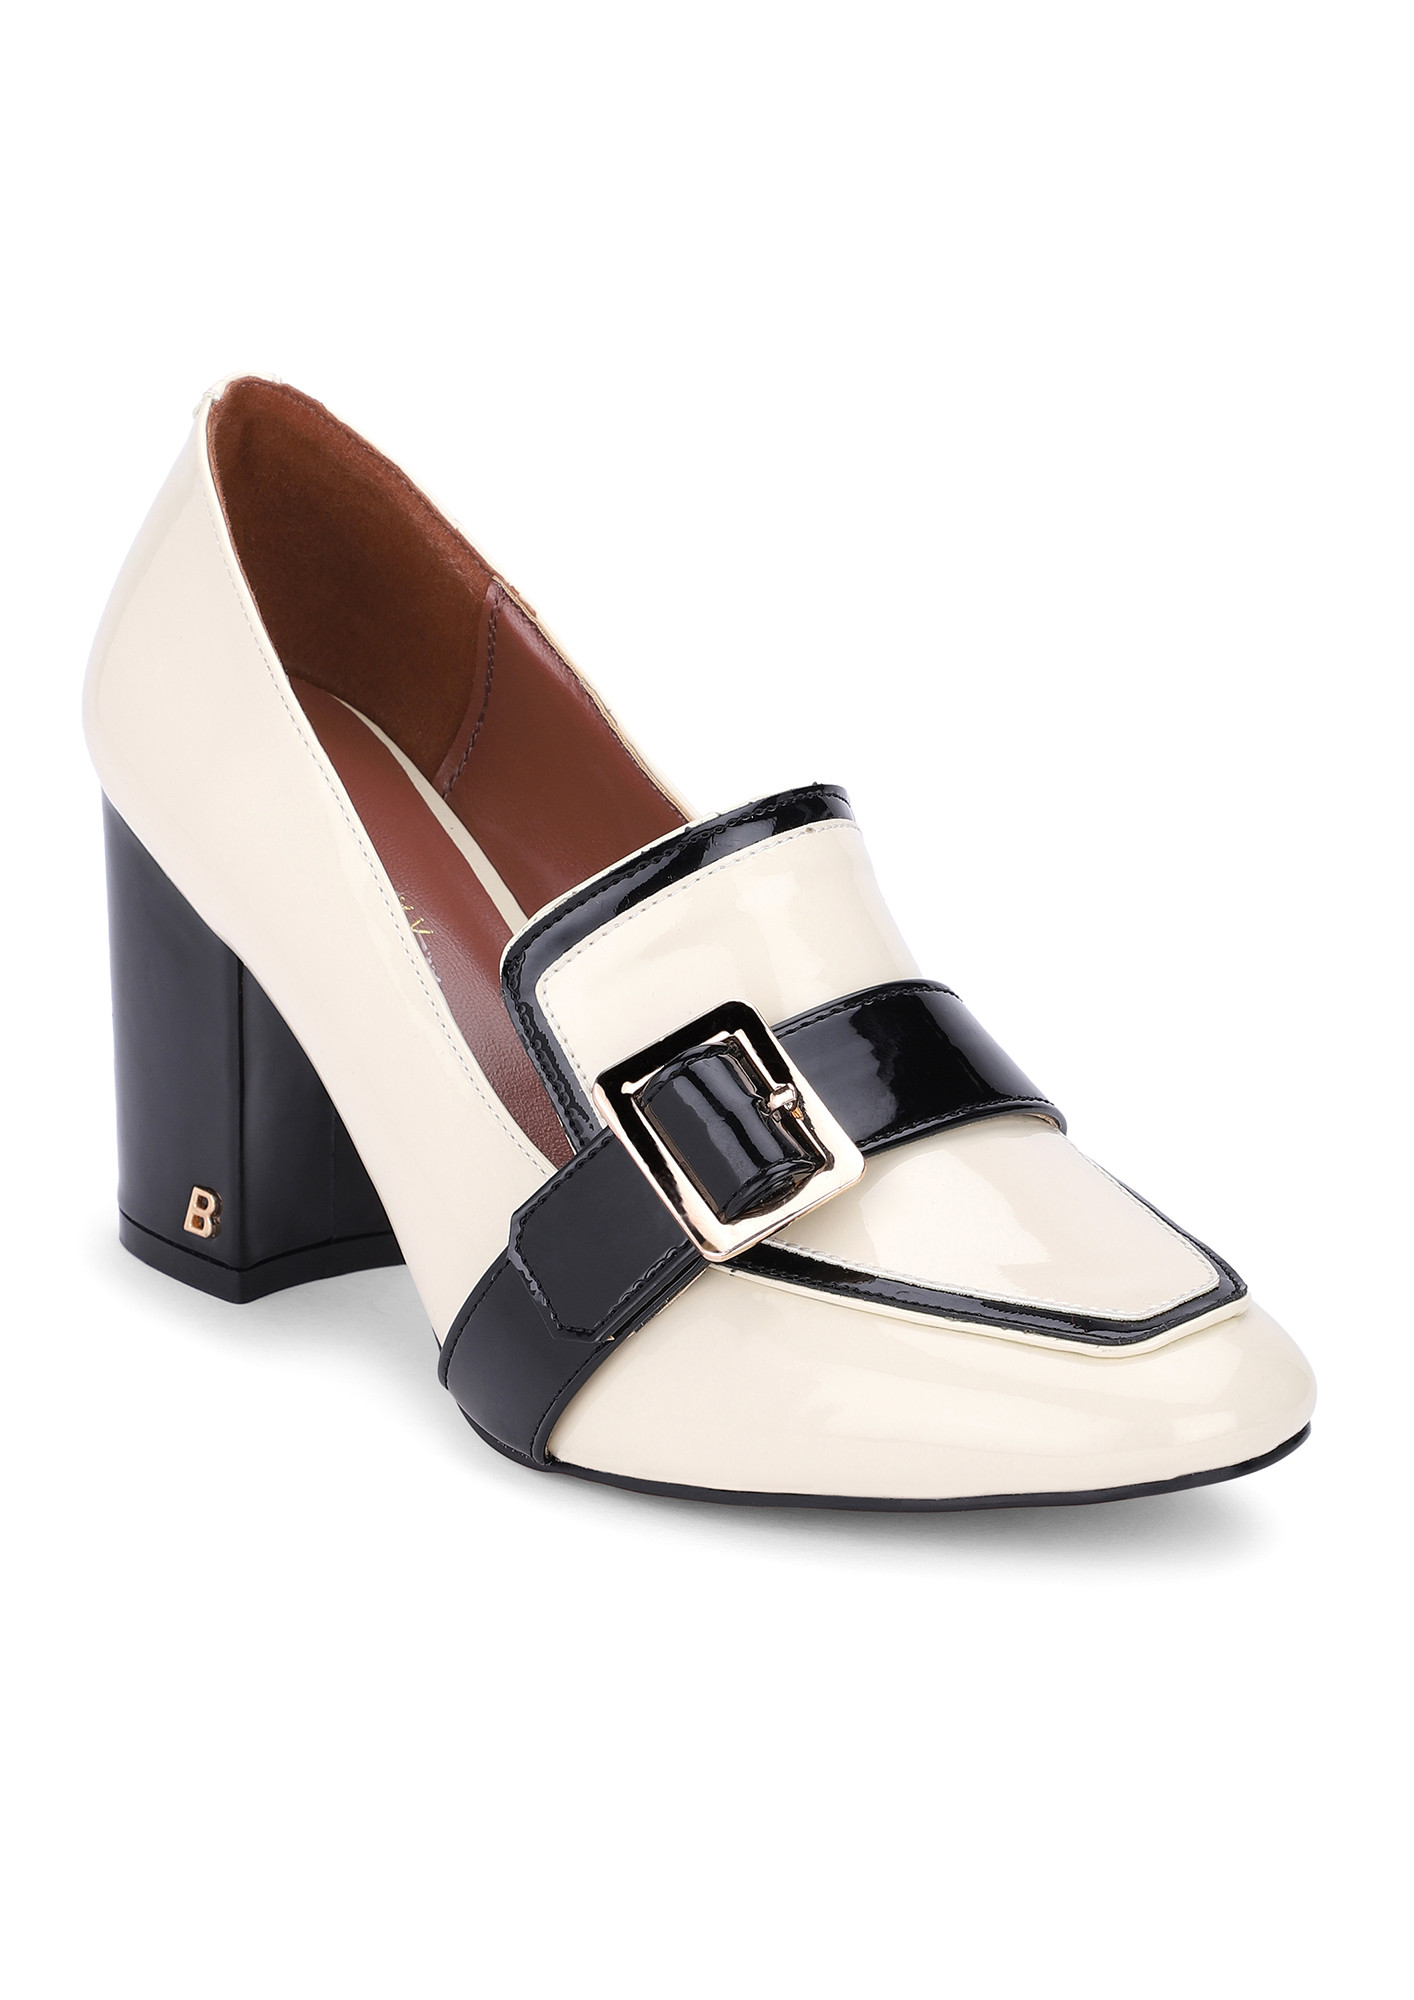 THE BOSS LADY BEIGE HEELED LOAFERS